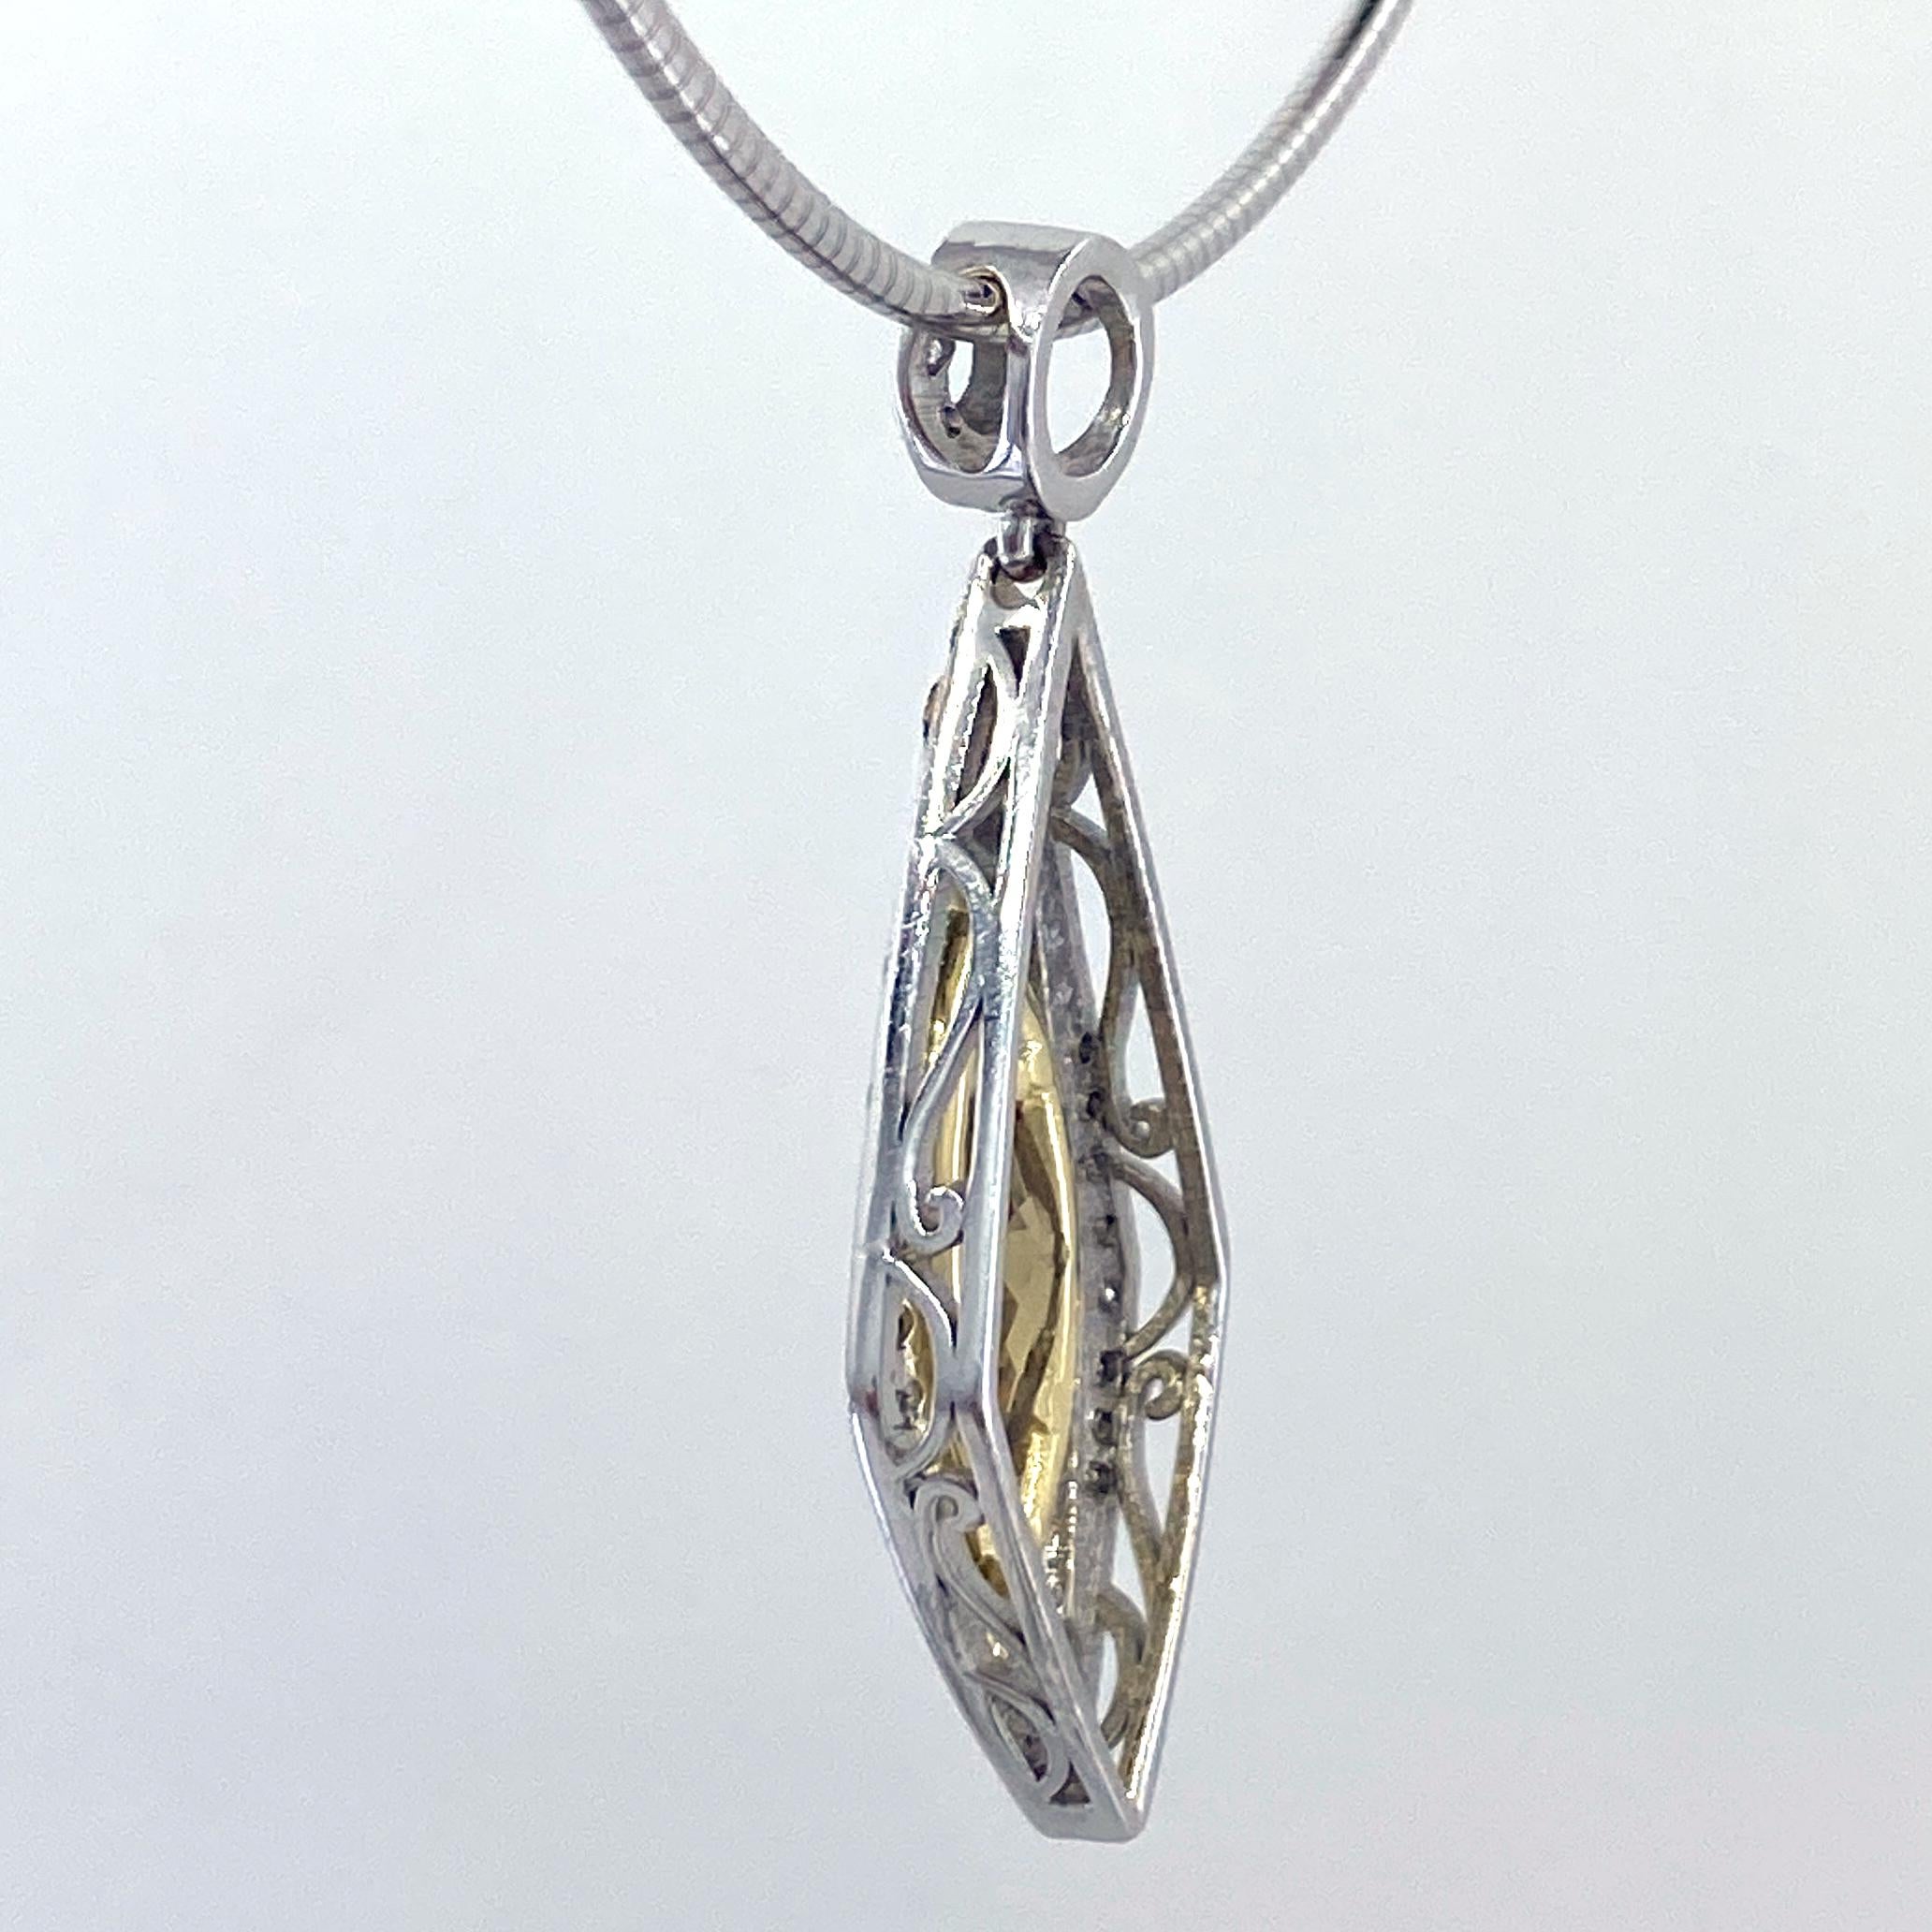 Diamond Pendant with 1.5 Carat Chrysoberyl on Omega Chain in White & Yellow Gold In New Condition For Sale In Sherman Oaks, CA